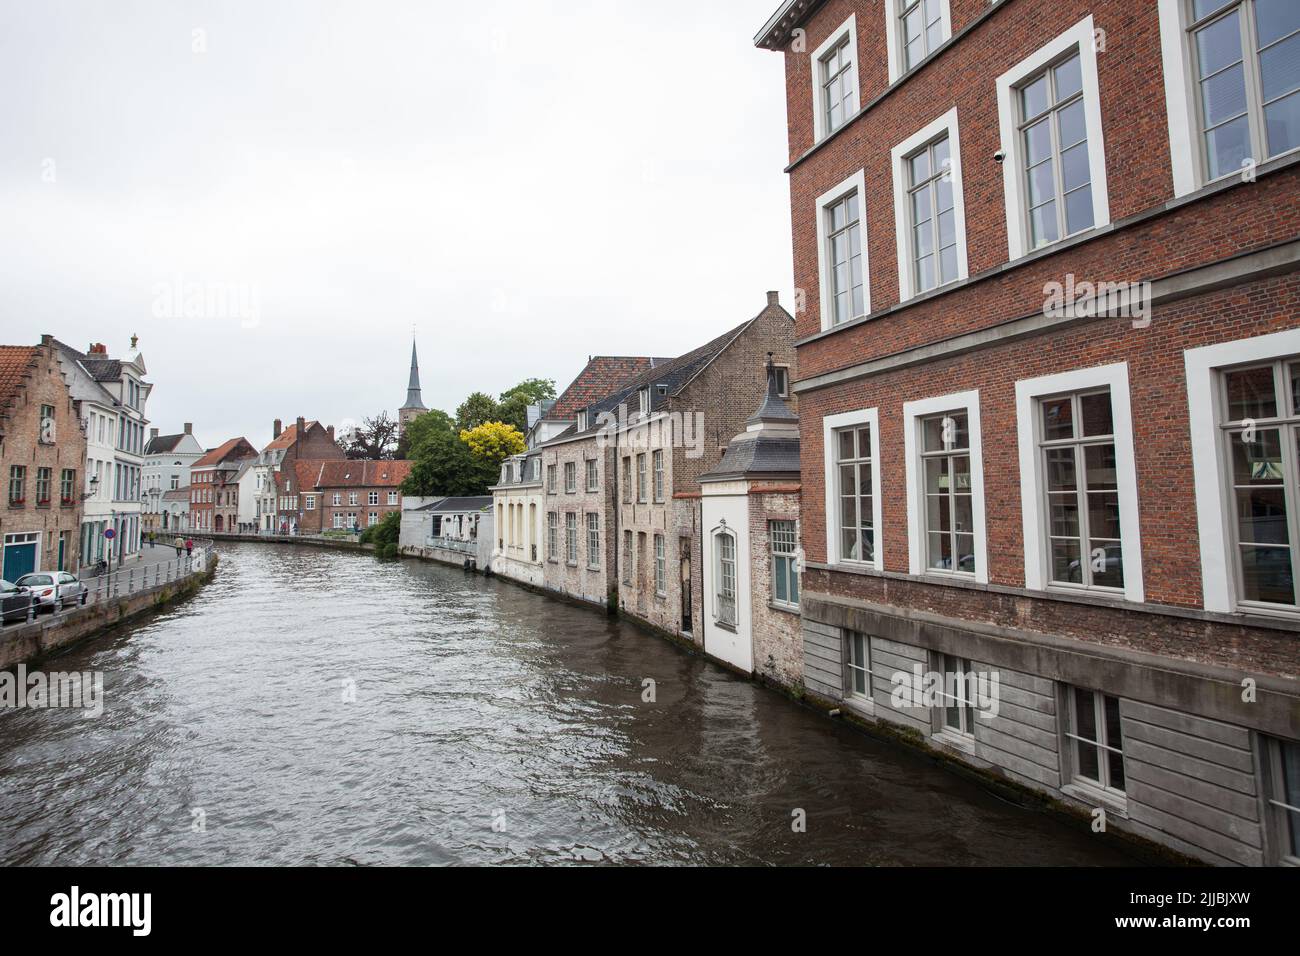 Streets of Brugges, Belgium, Europe, street scene with part of city's canal network Stock Photo